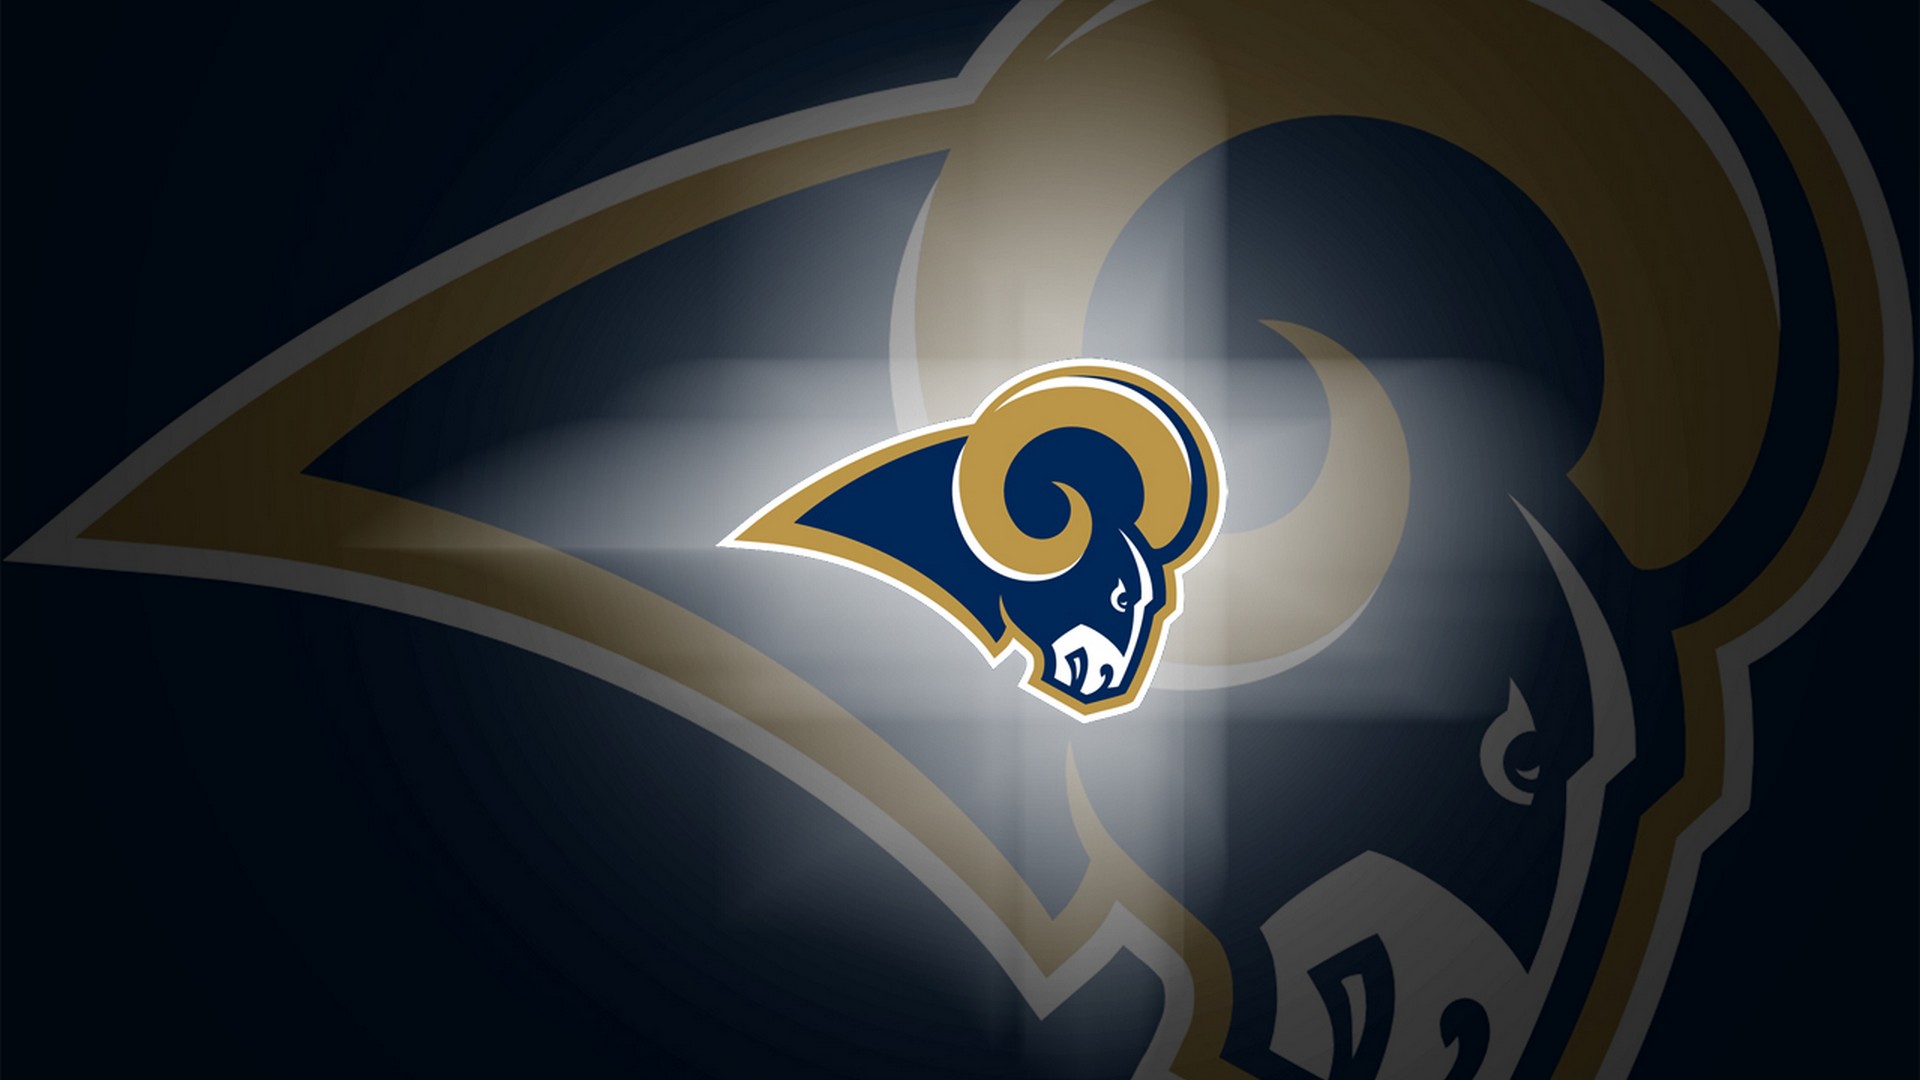 Windows Wallpaper Los Angeles Rams With Resolution 1920X1080 pixel. You can make this wallpaper for your Mac or Windows Desktop Background, iPhone, Android or Tablet and another Smartphone device for free